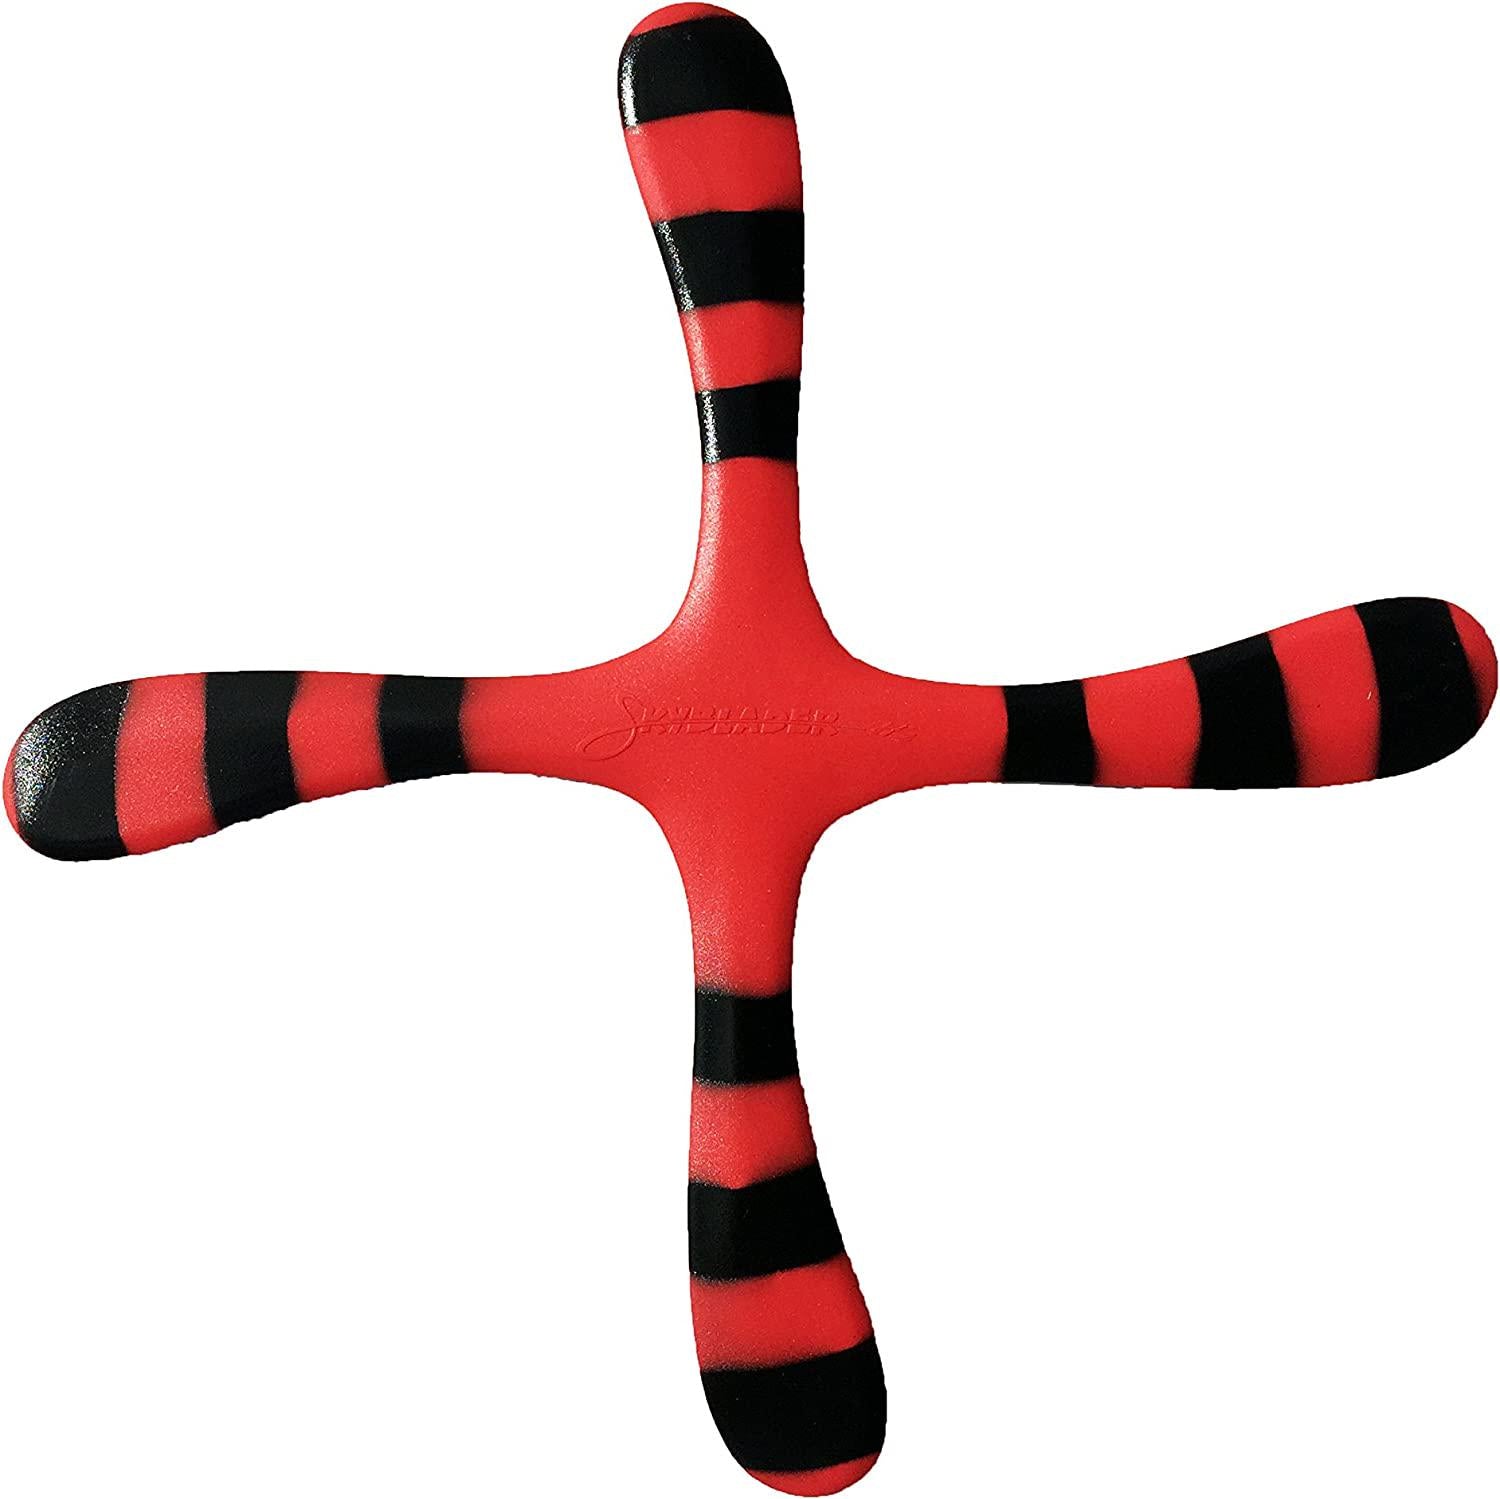 Colorado Boomerangs, Left Handed Red Bumblebee Boomerang - Easy Returning Boomerangs. Great for Kids and Adults.